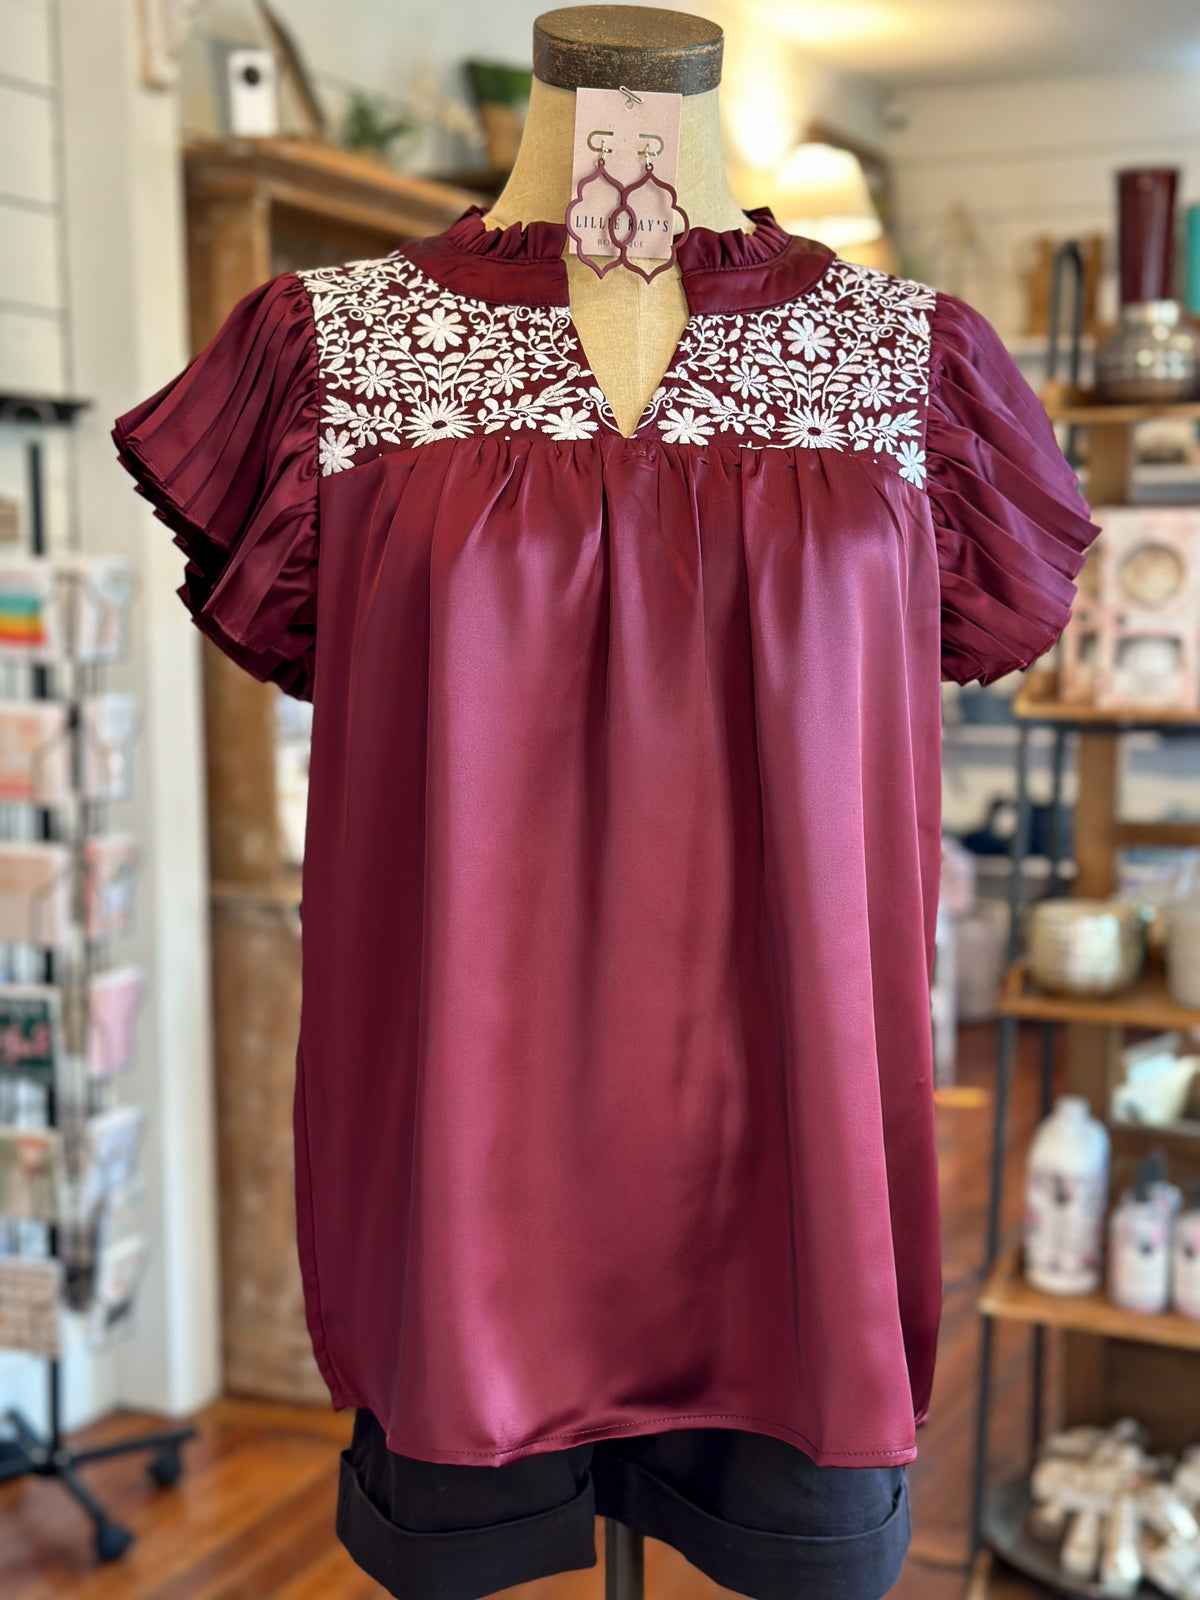 maroon and white embroidered top washco